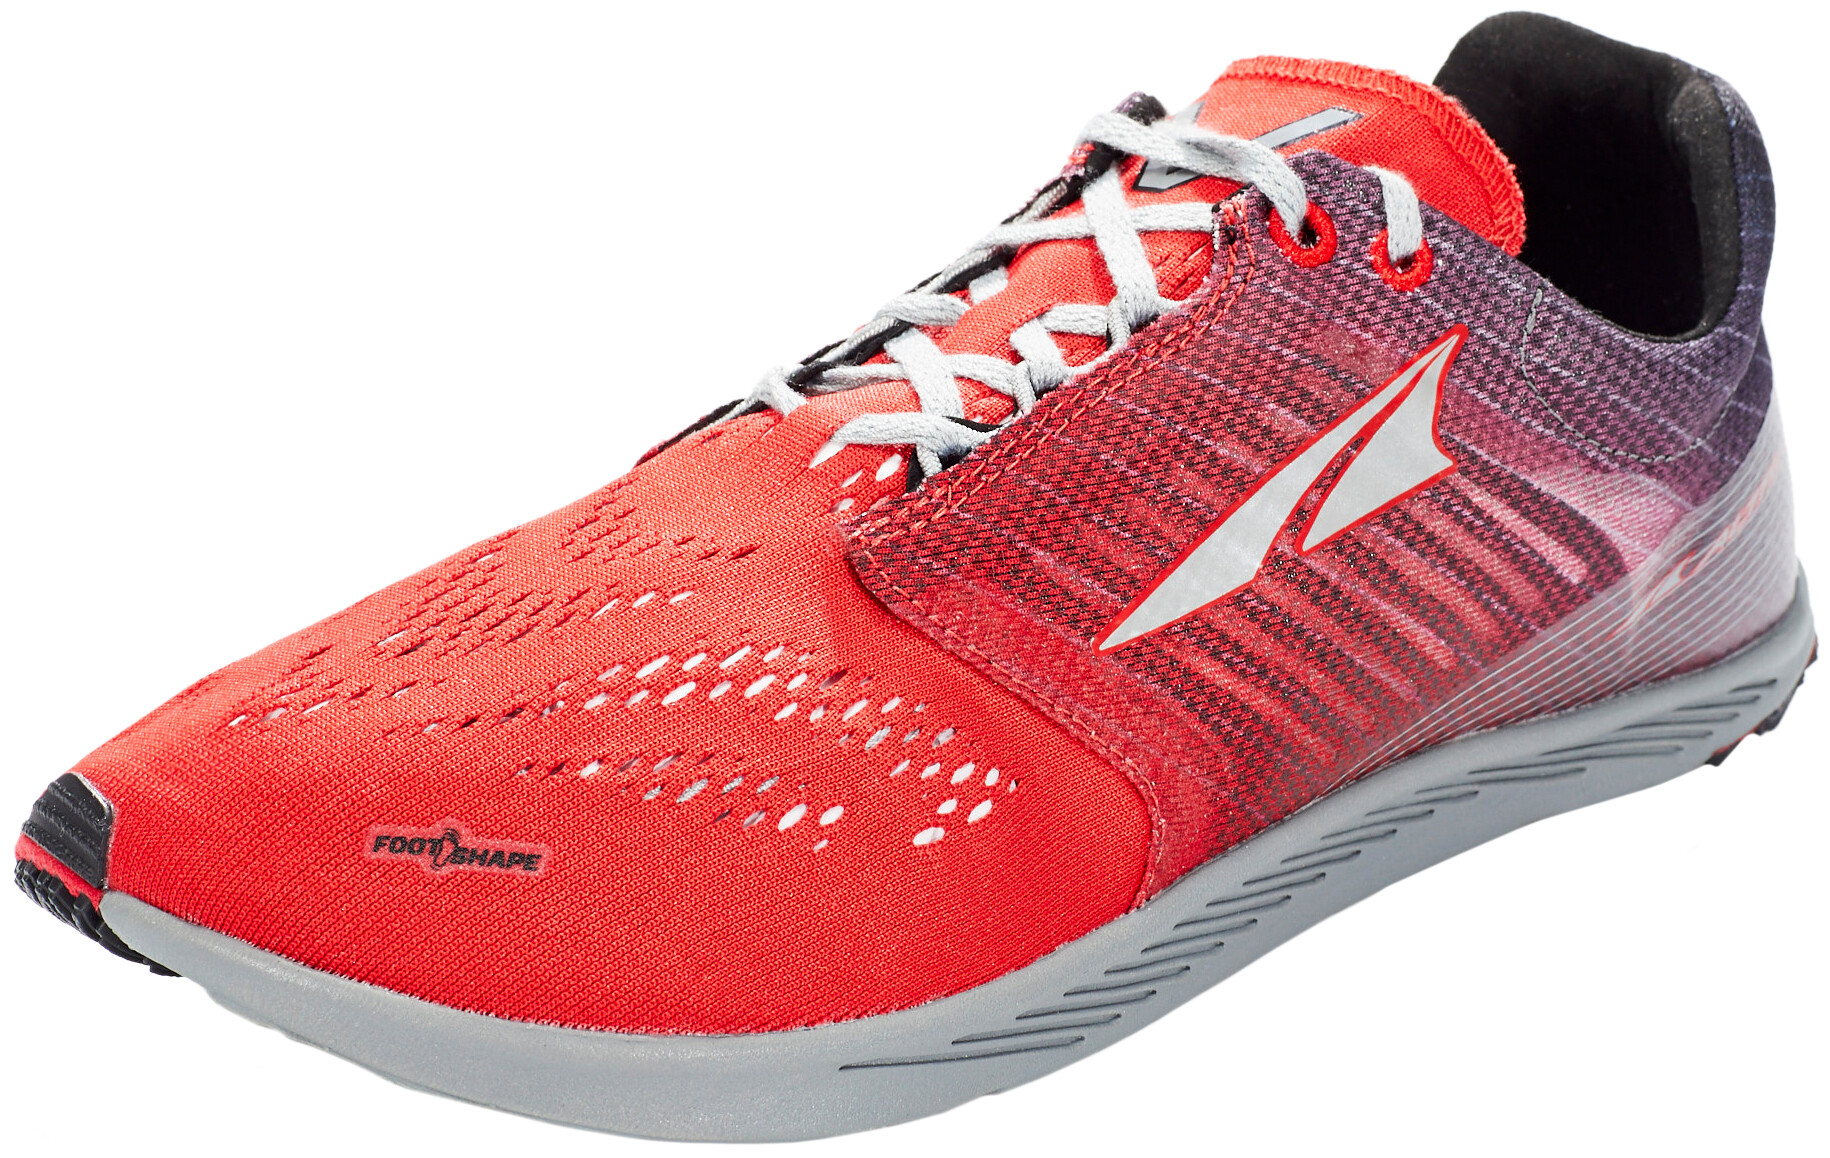 Altra Vanish R Shoes red at bikester.co.uk